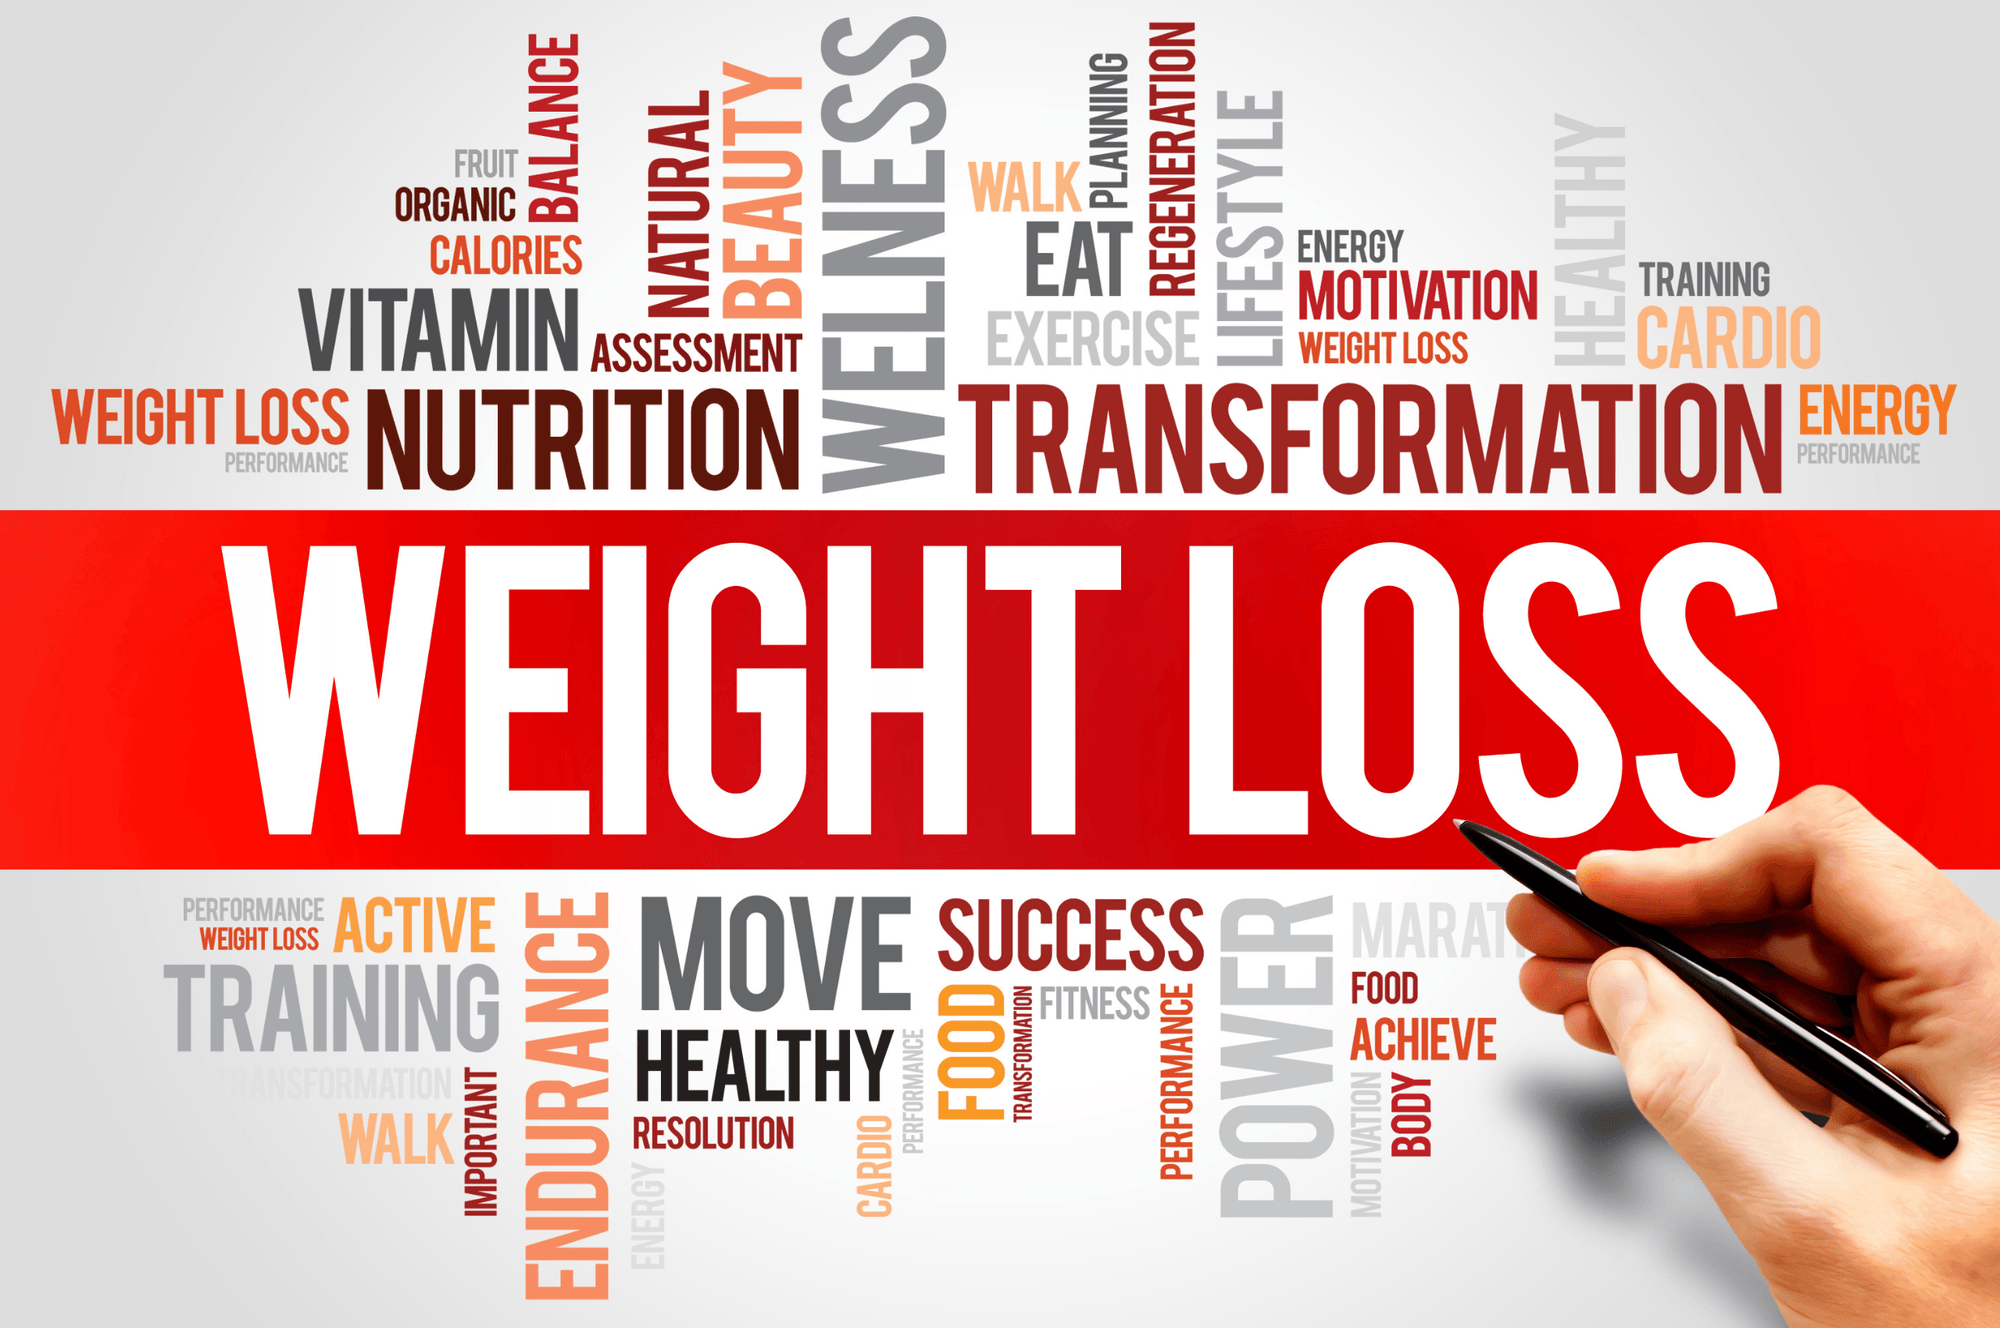 How Could You Overcome Common Weight Loss Barriers? - Lepulse